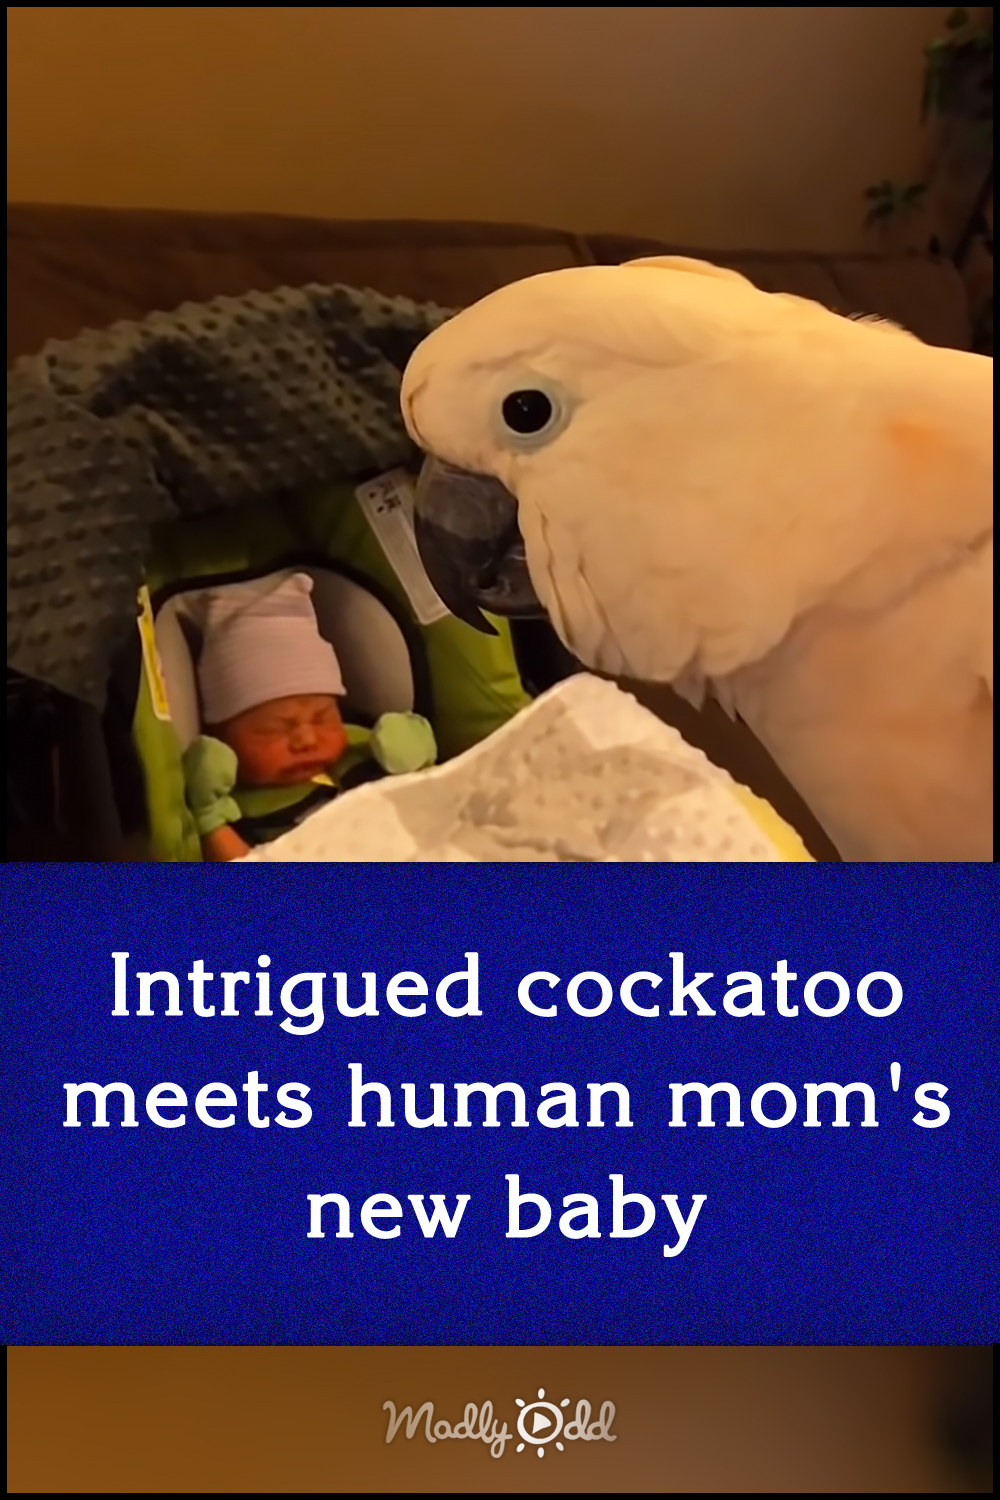 Cockatoo discovers baby\'s new toys and his reaction is priceless